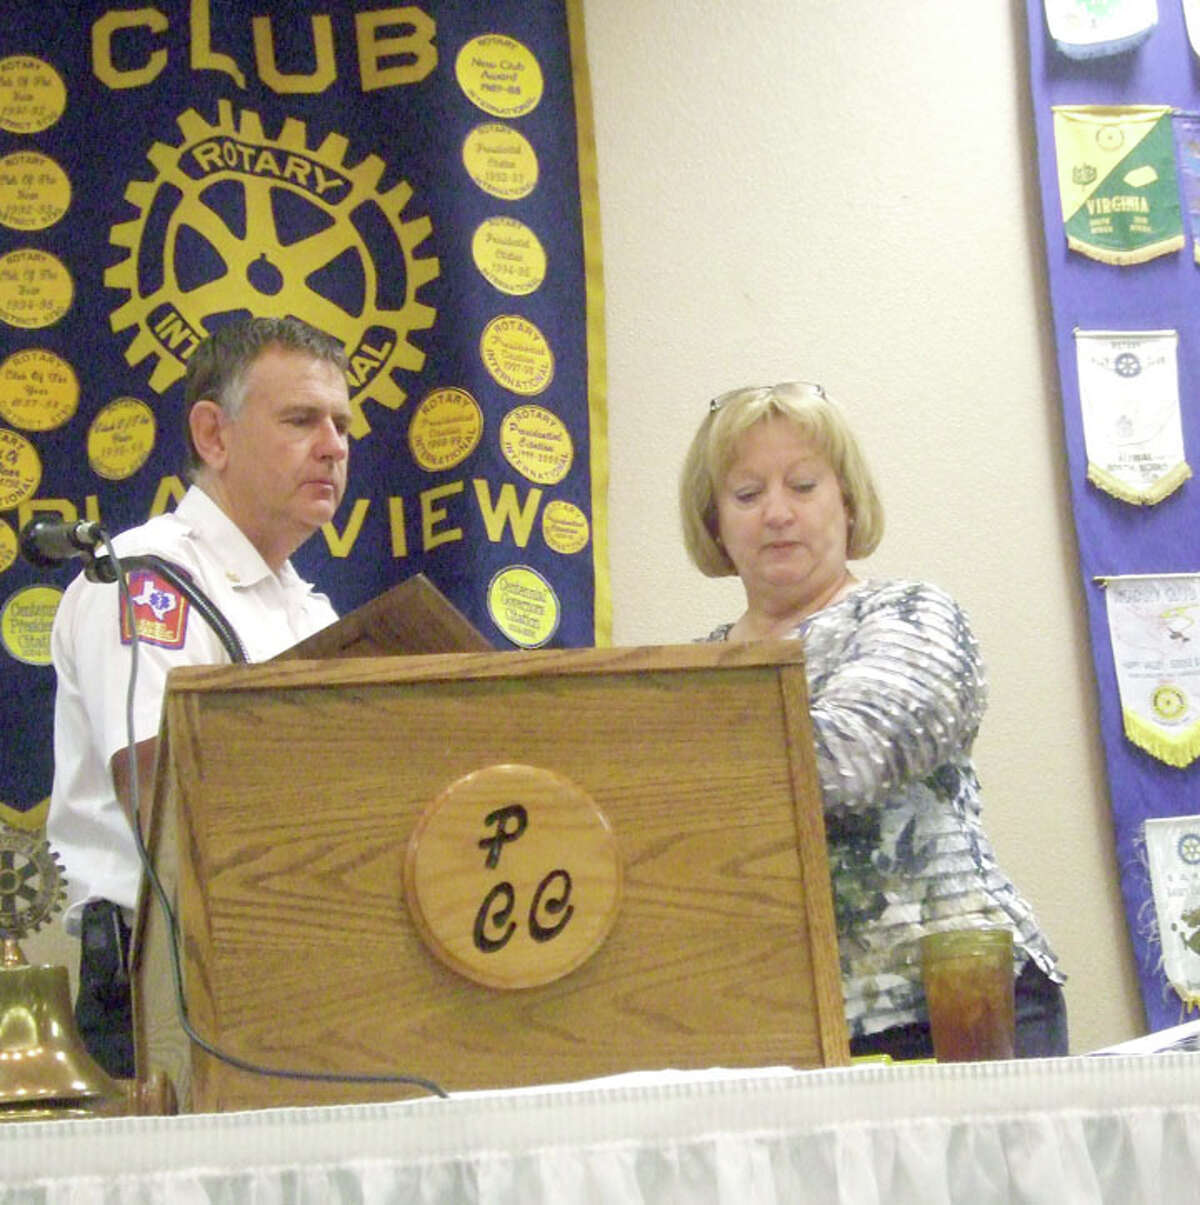 Jessica Thornton/Plainview HeraldFire Chief Rusty Powers accepts the Citizenship Award from Plain view Rotary Club President Coralyn Dillard Tuesday during the club meeting. The club recognized Plainview’s First Responders.